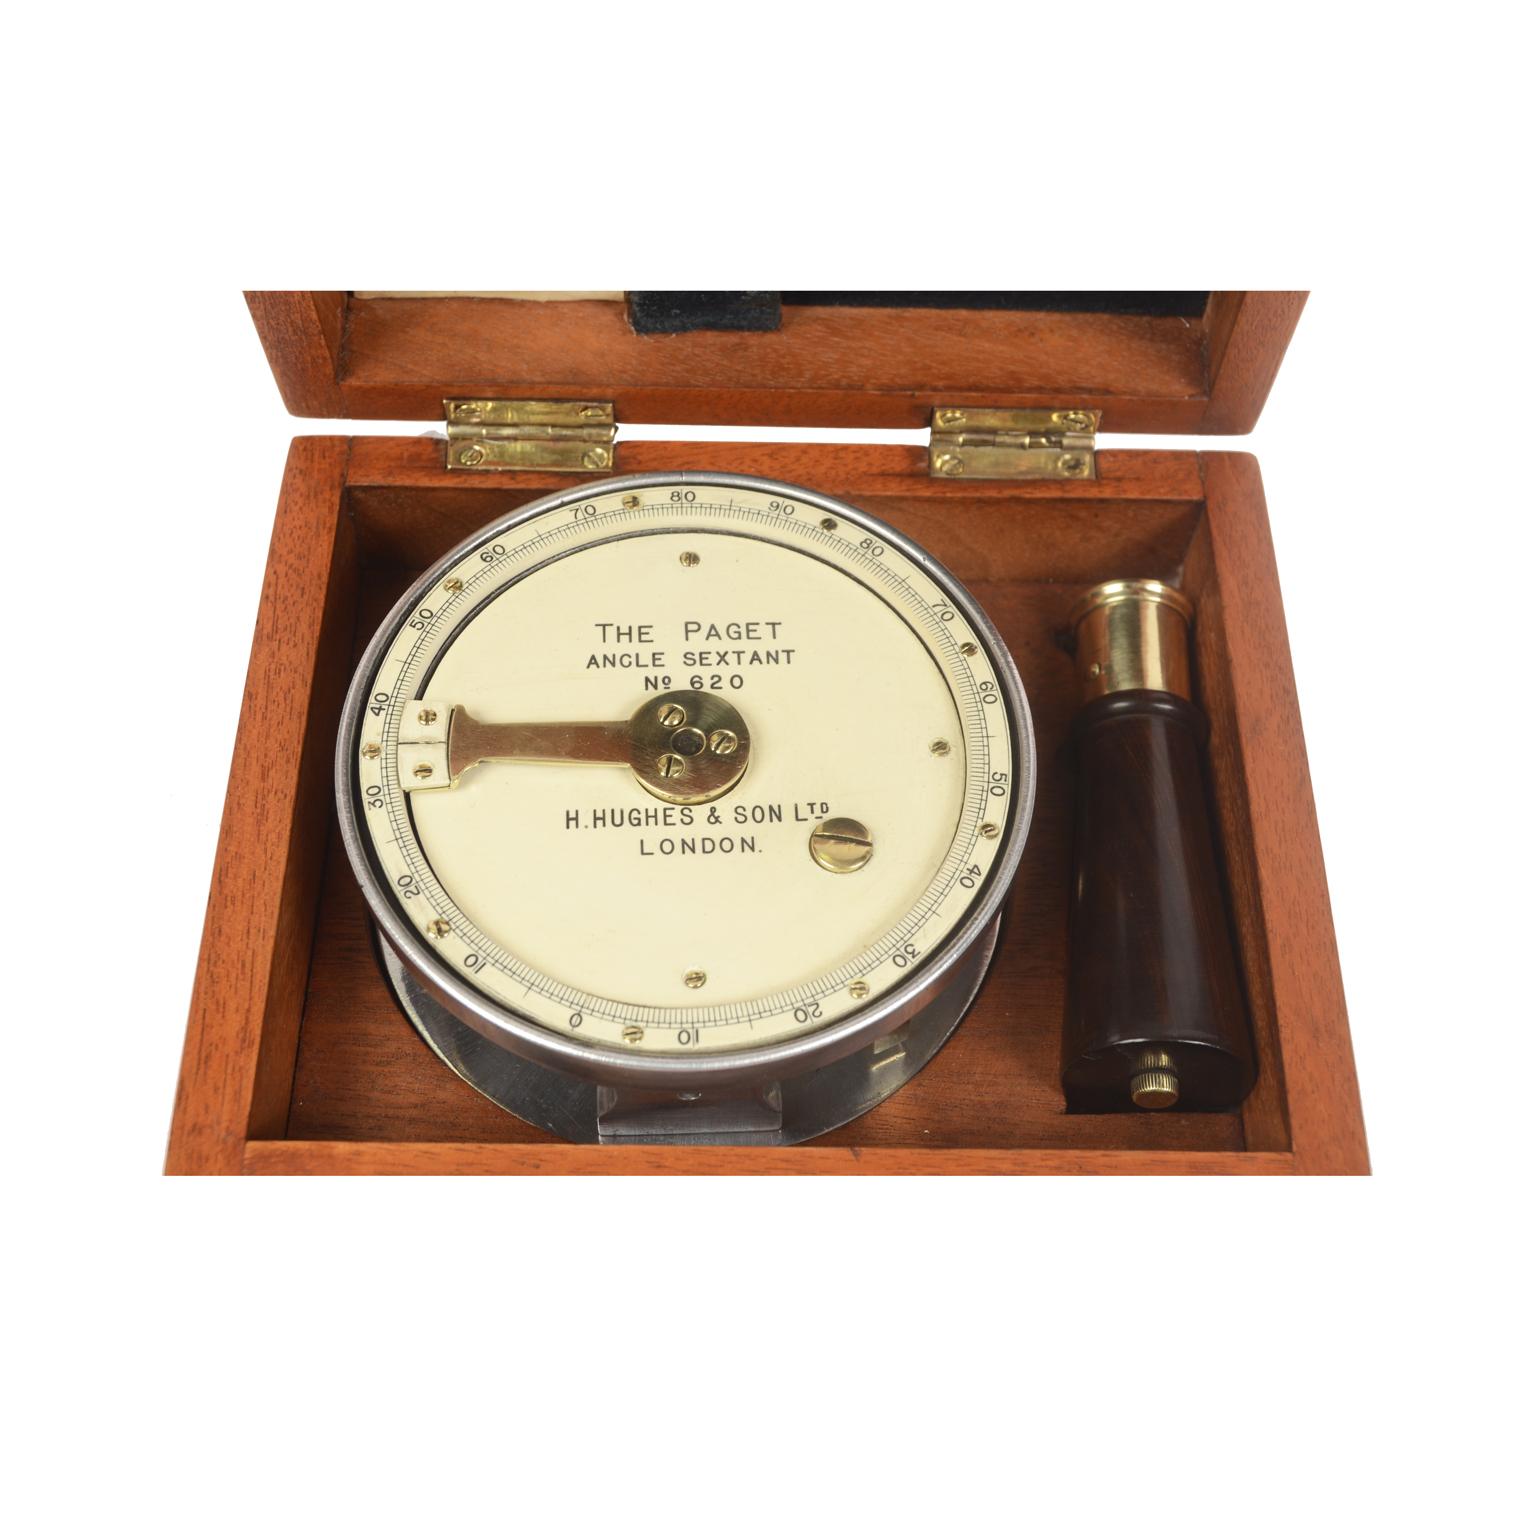 Paget angular sextant, H. Hughes & Son Ltd London no. 620 datable to 1910 circa. The sextant is made up of two round aluminum plates, the upper part with the avorioline goniometric scale and the vernier, while the rosewood handle is screwed into the